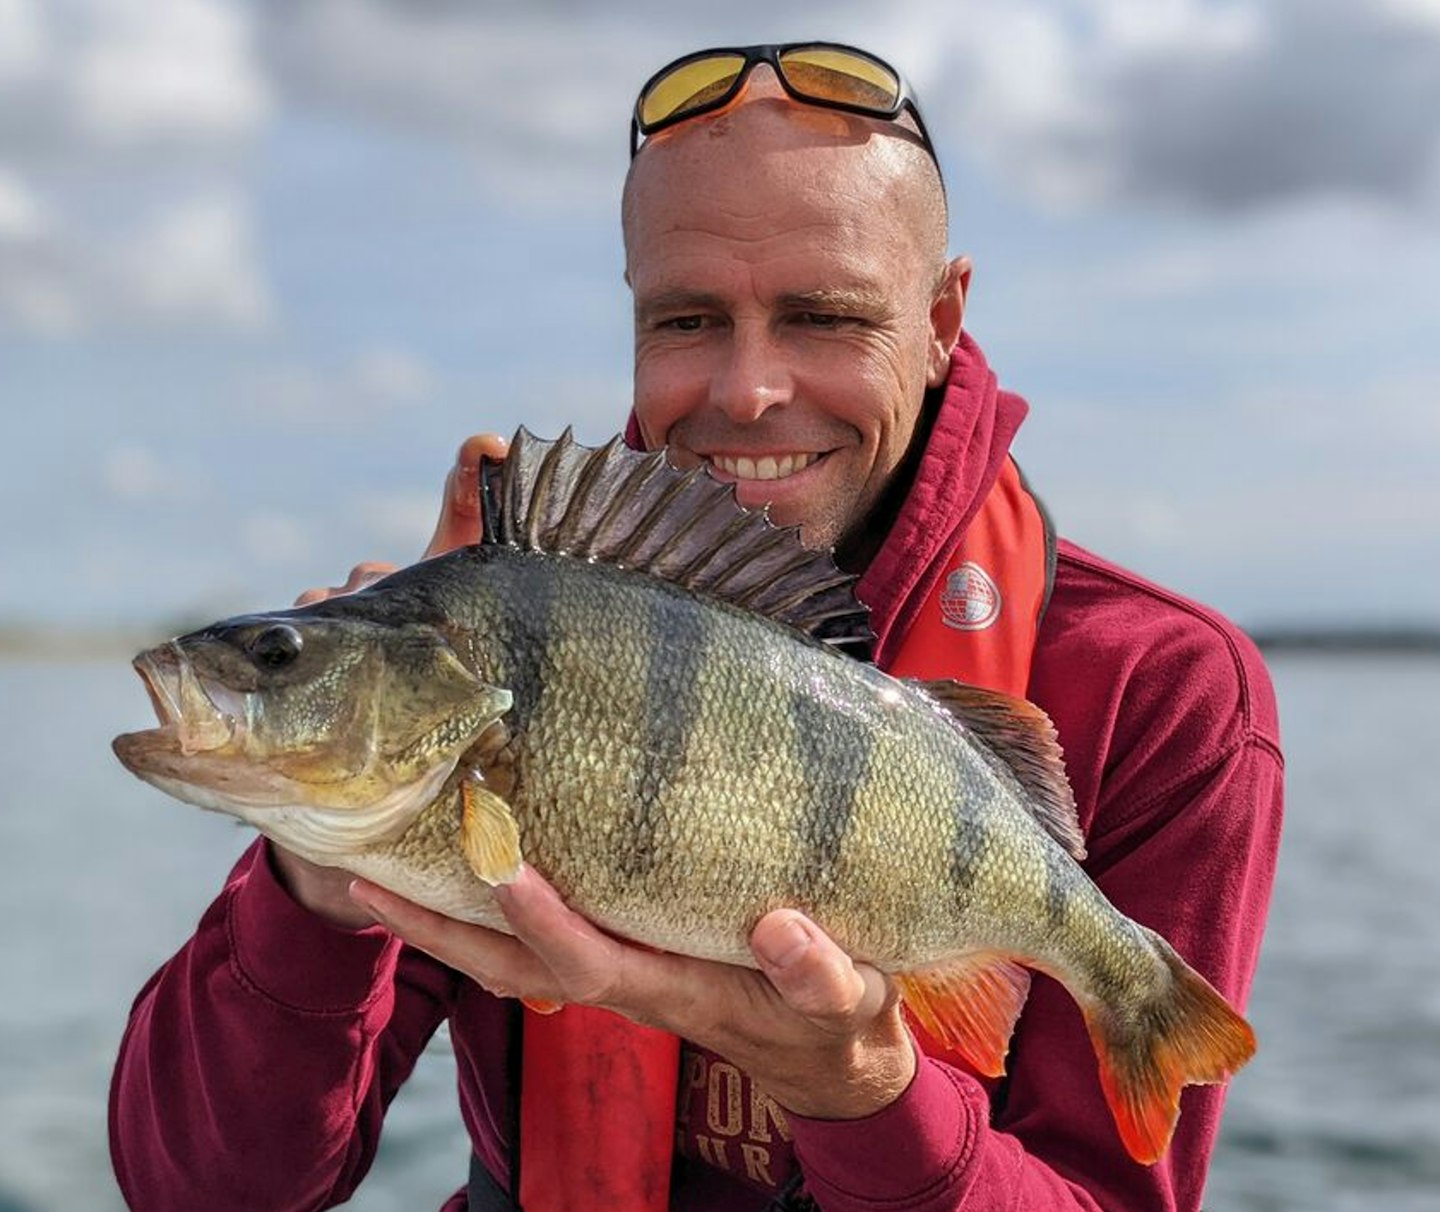 The fish – weighing 4lb 2oz – ended a two decade-long quest for a ‘four’ by the Olympic decathlete and TV star